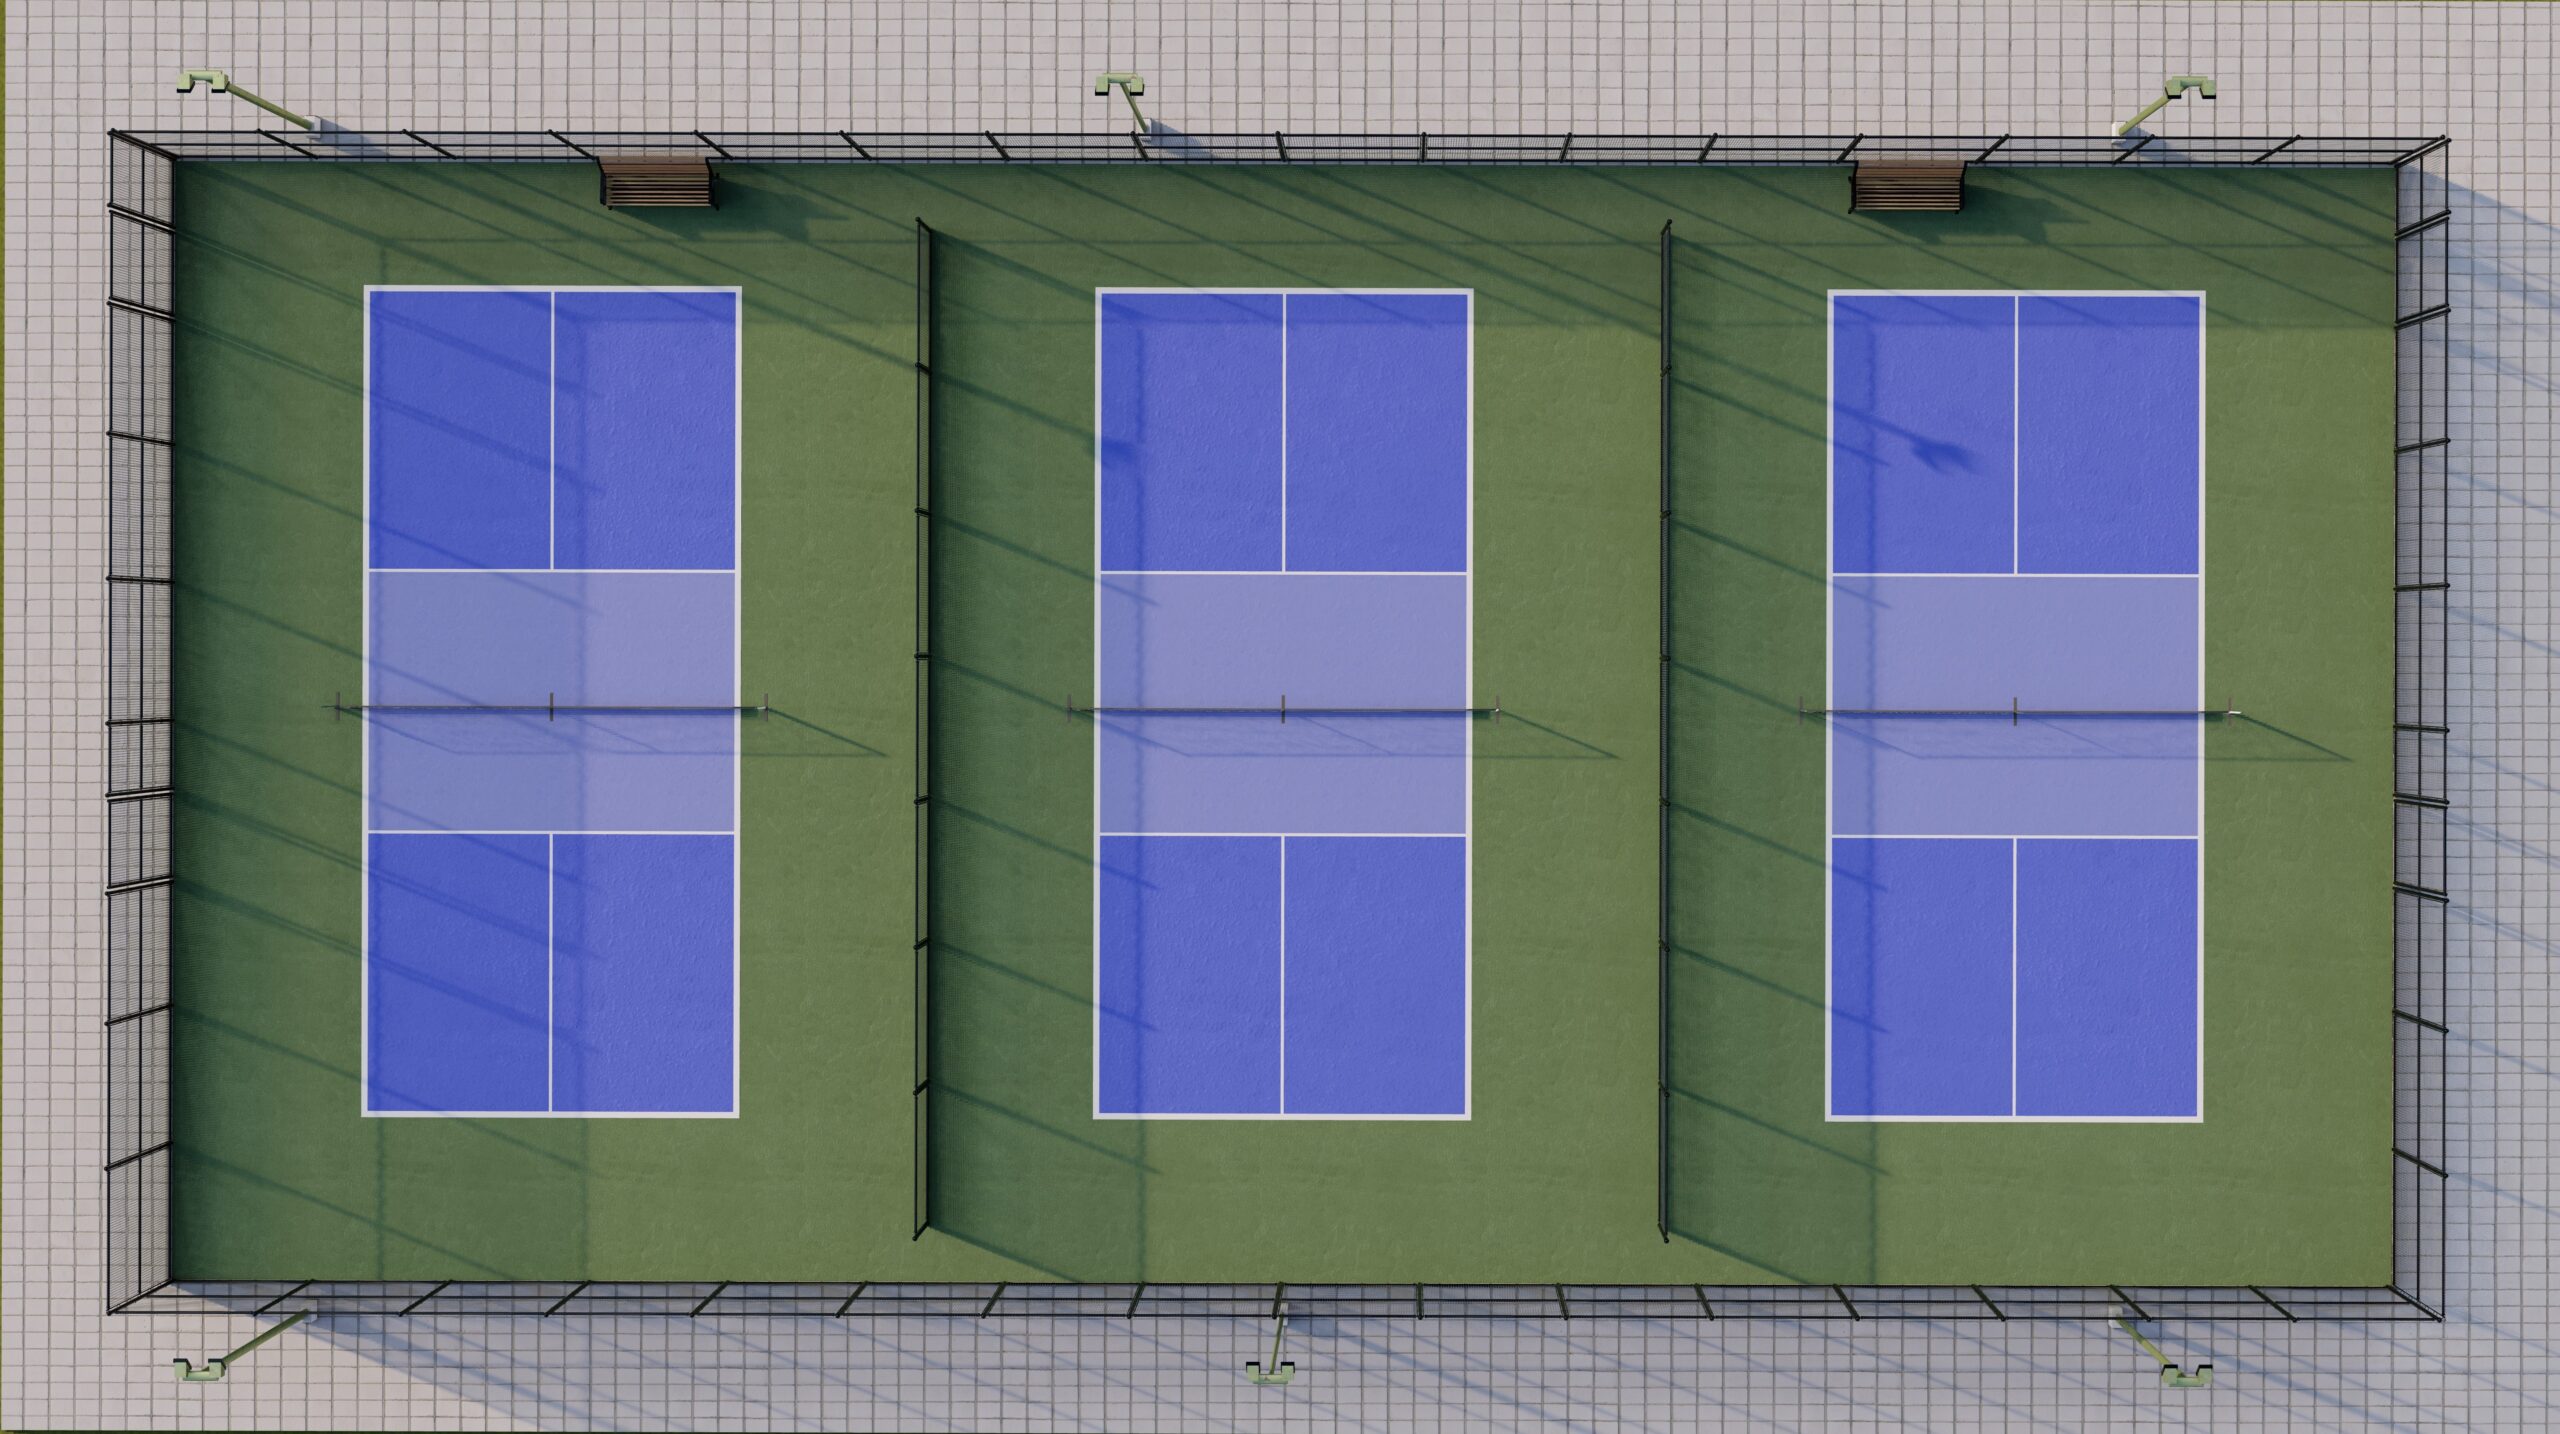 1 tennis courts converted to 3 pickleball courts